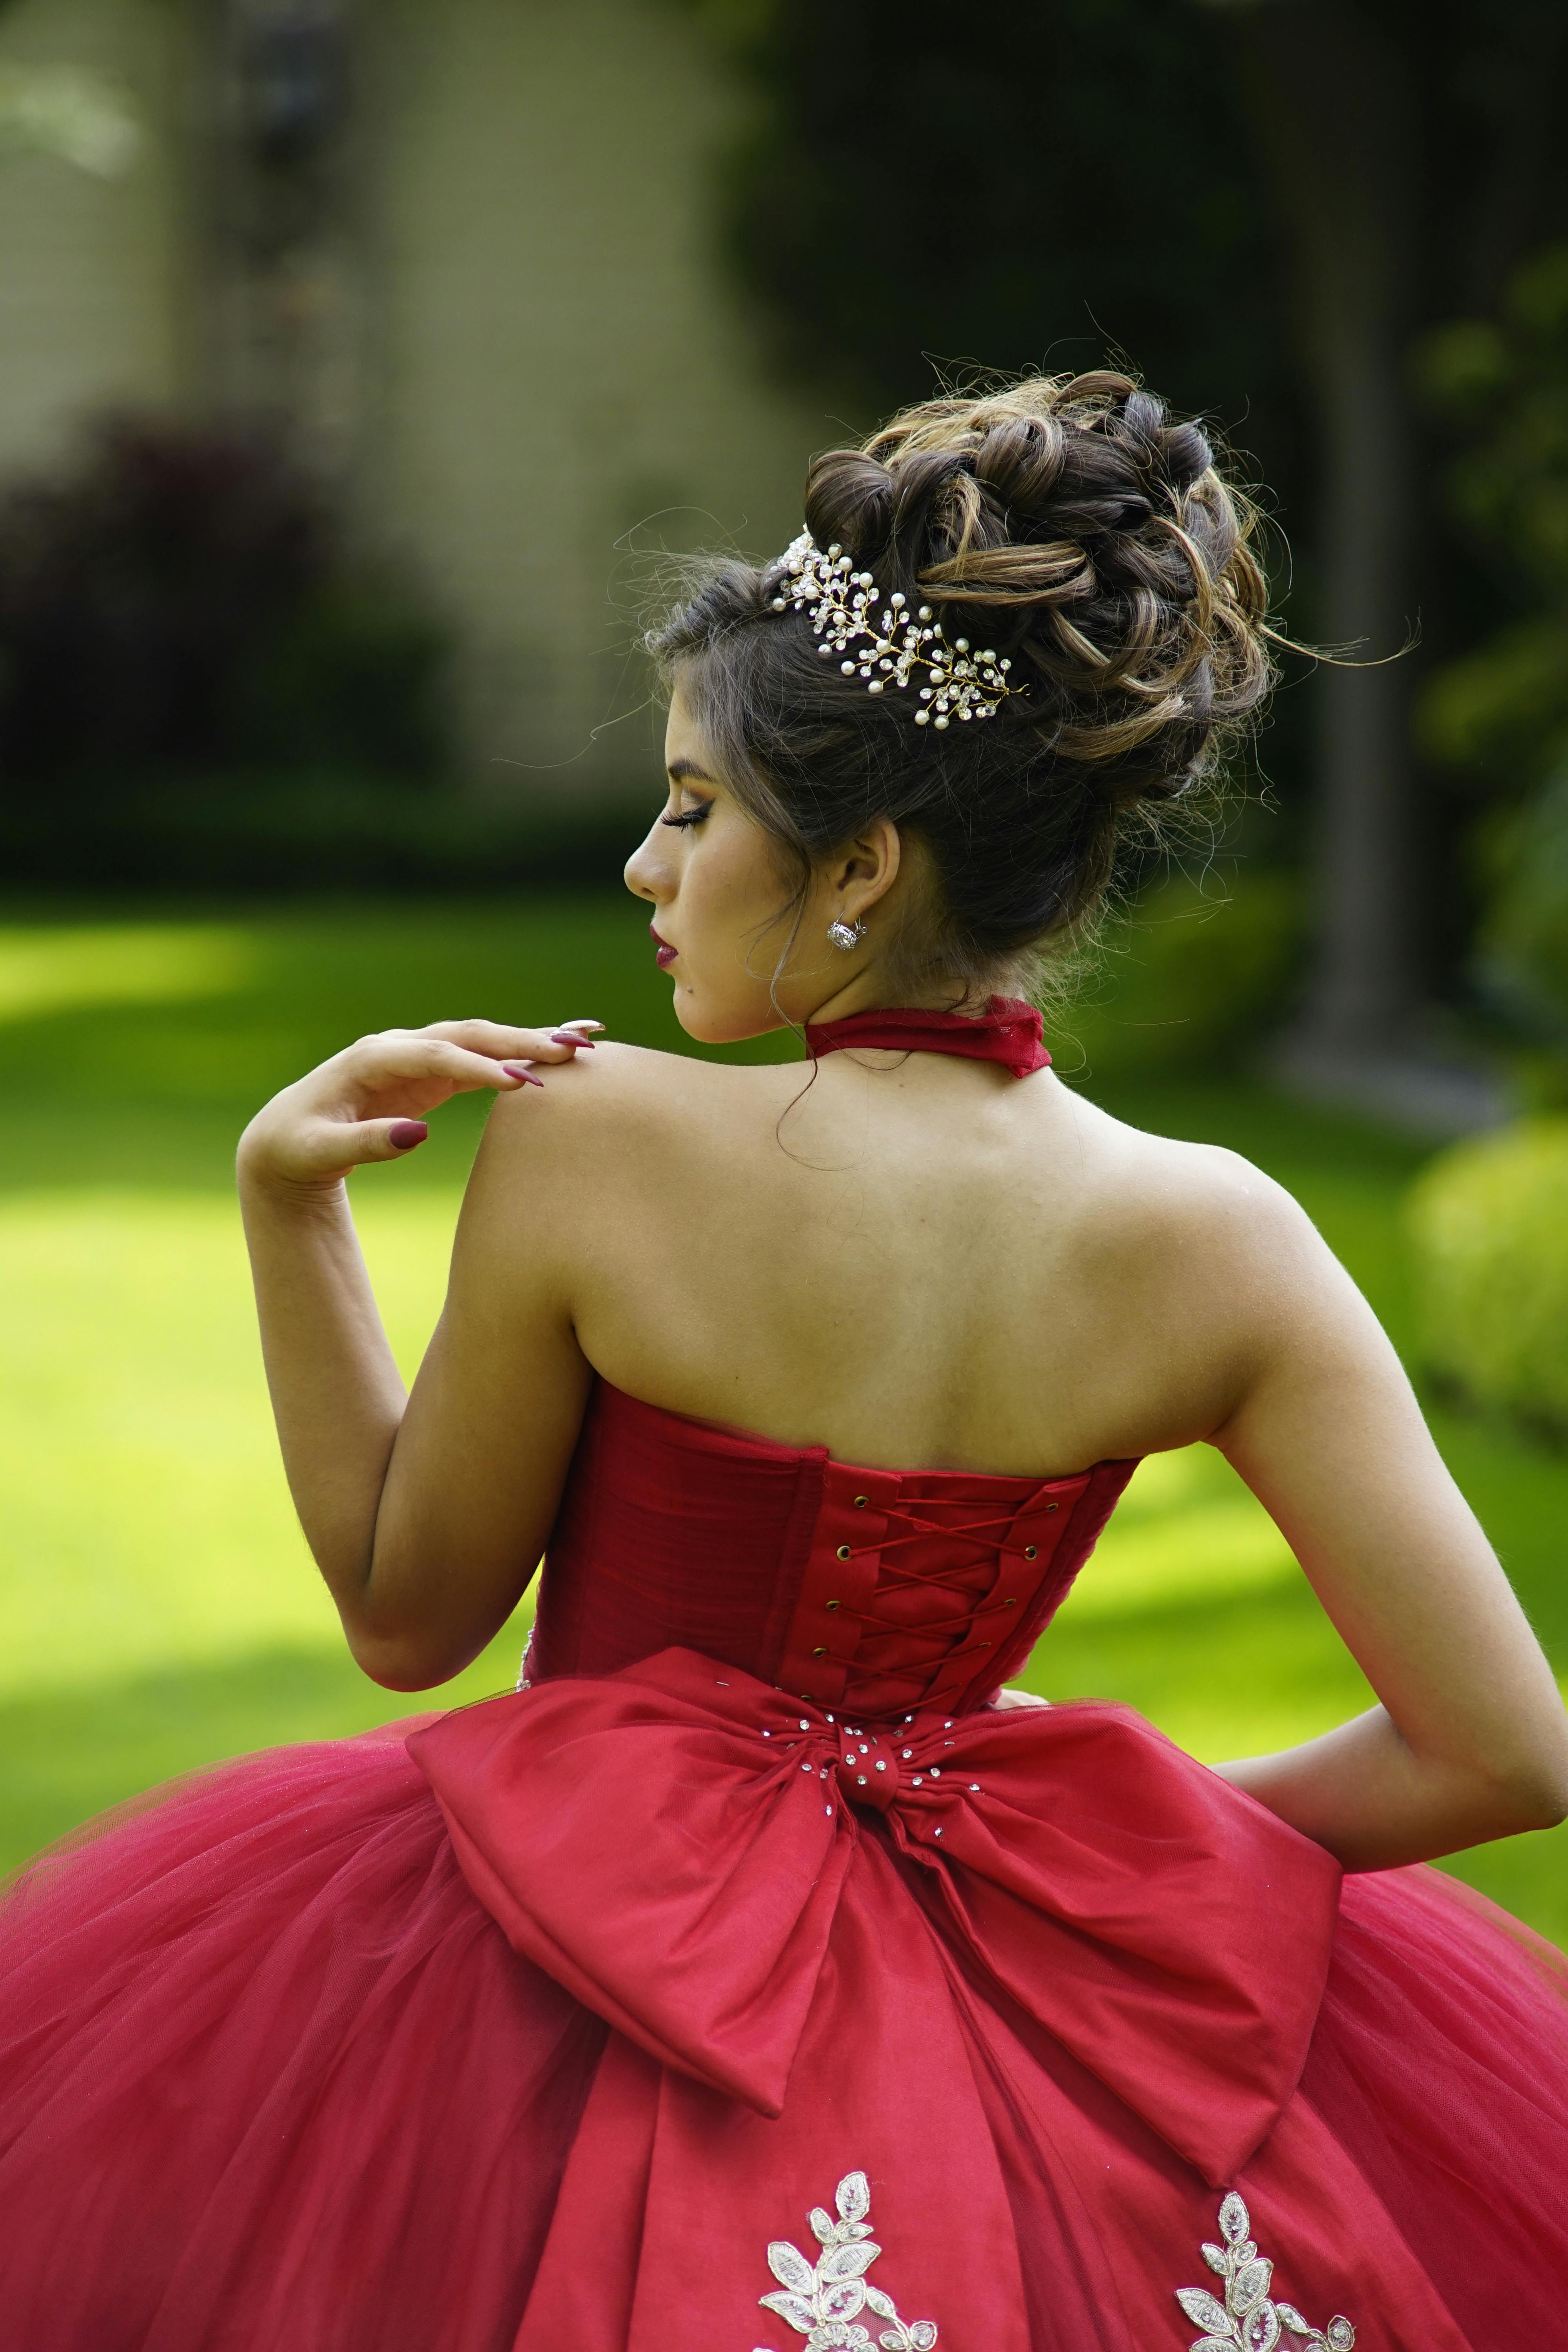 Free Photos - A Beautiful Woman In A Multicolored Dress That Gracefully  Flutters Around Her As She Poses For The Picture. Her Stunning Appearance  Captures The Viewer's Attention. | FreePixel.com